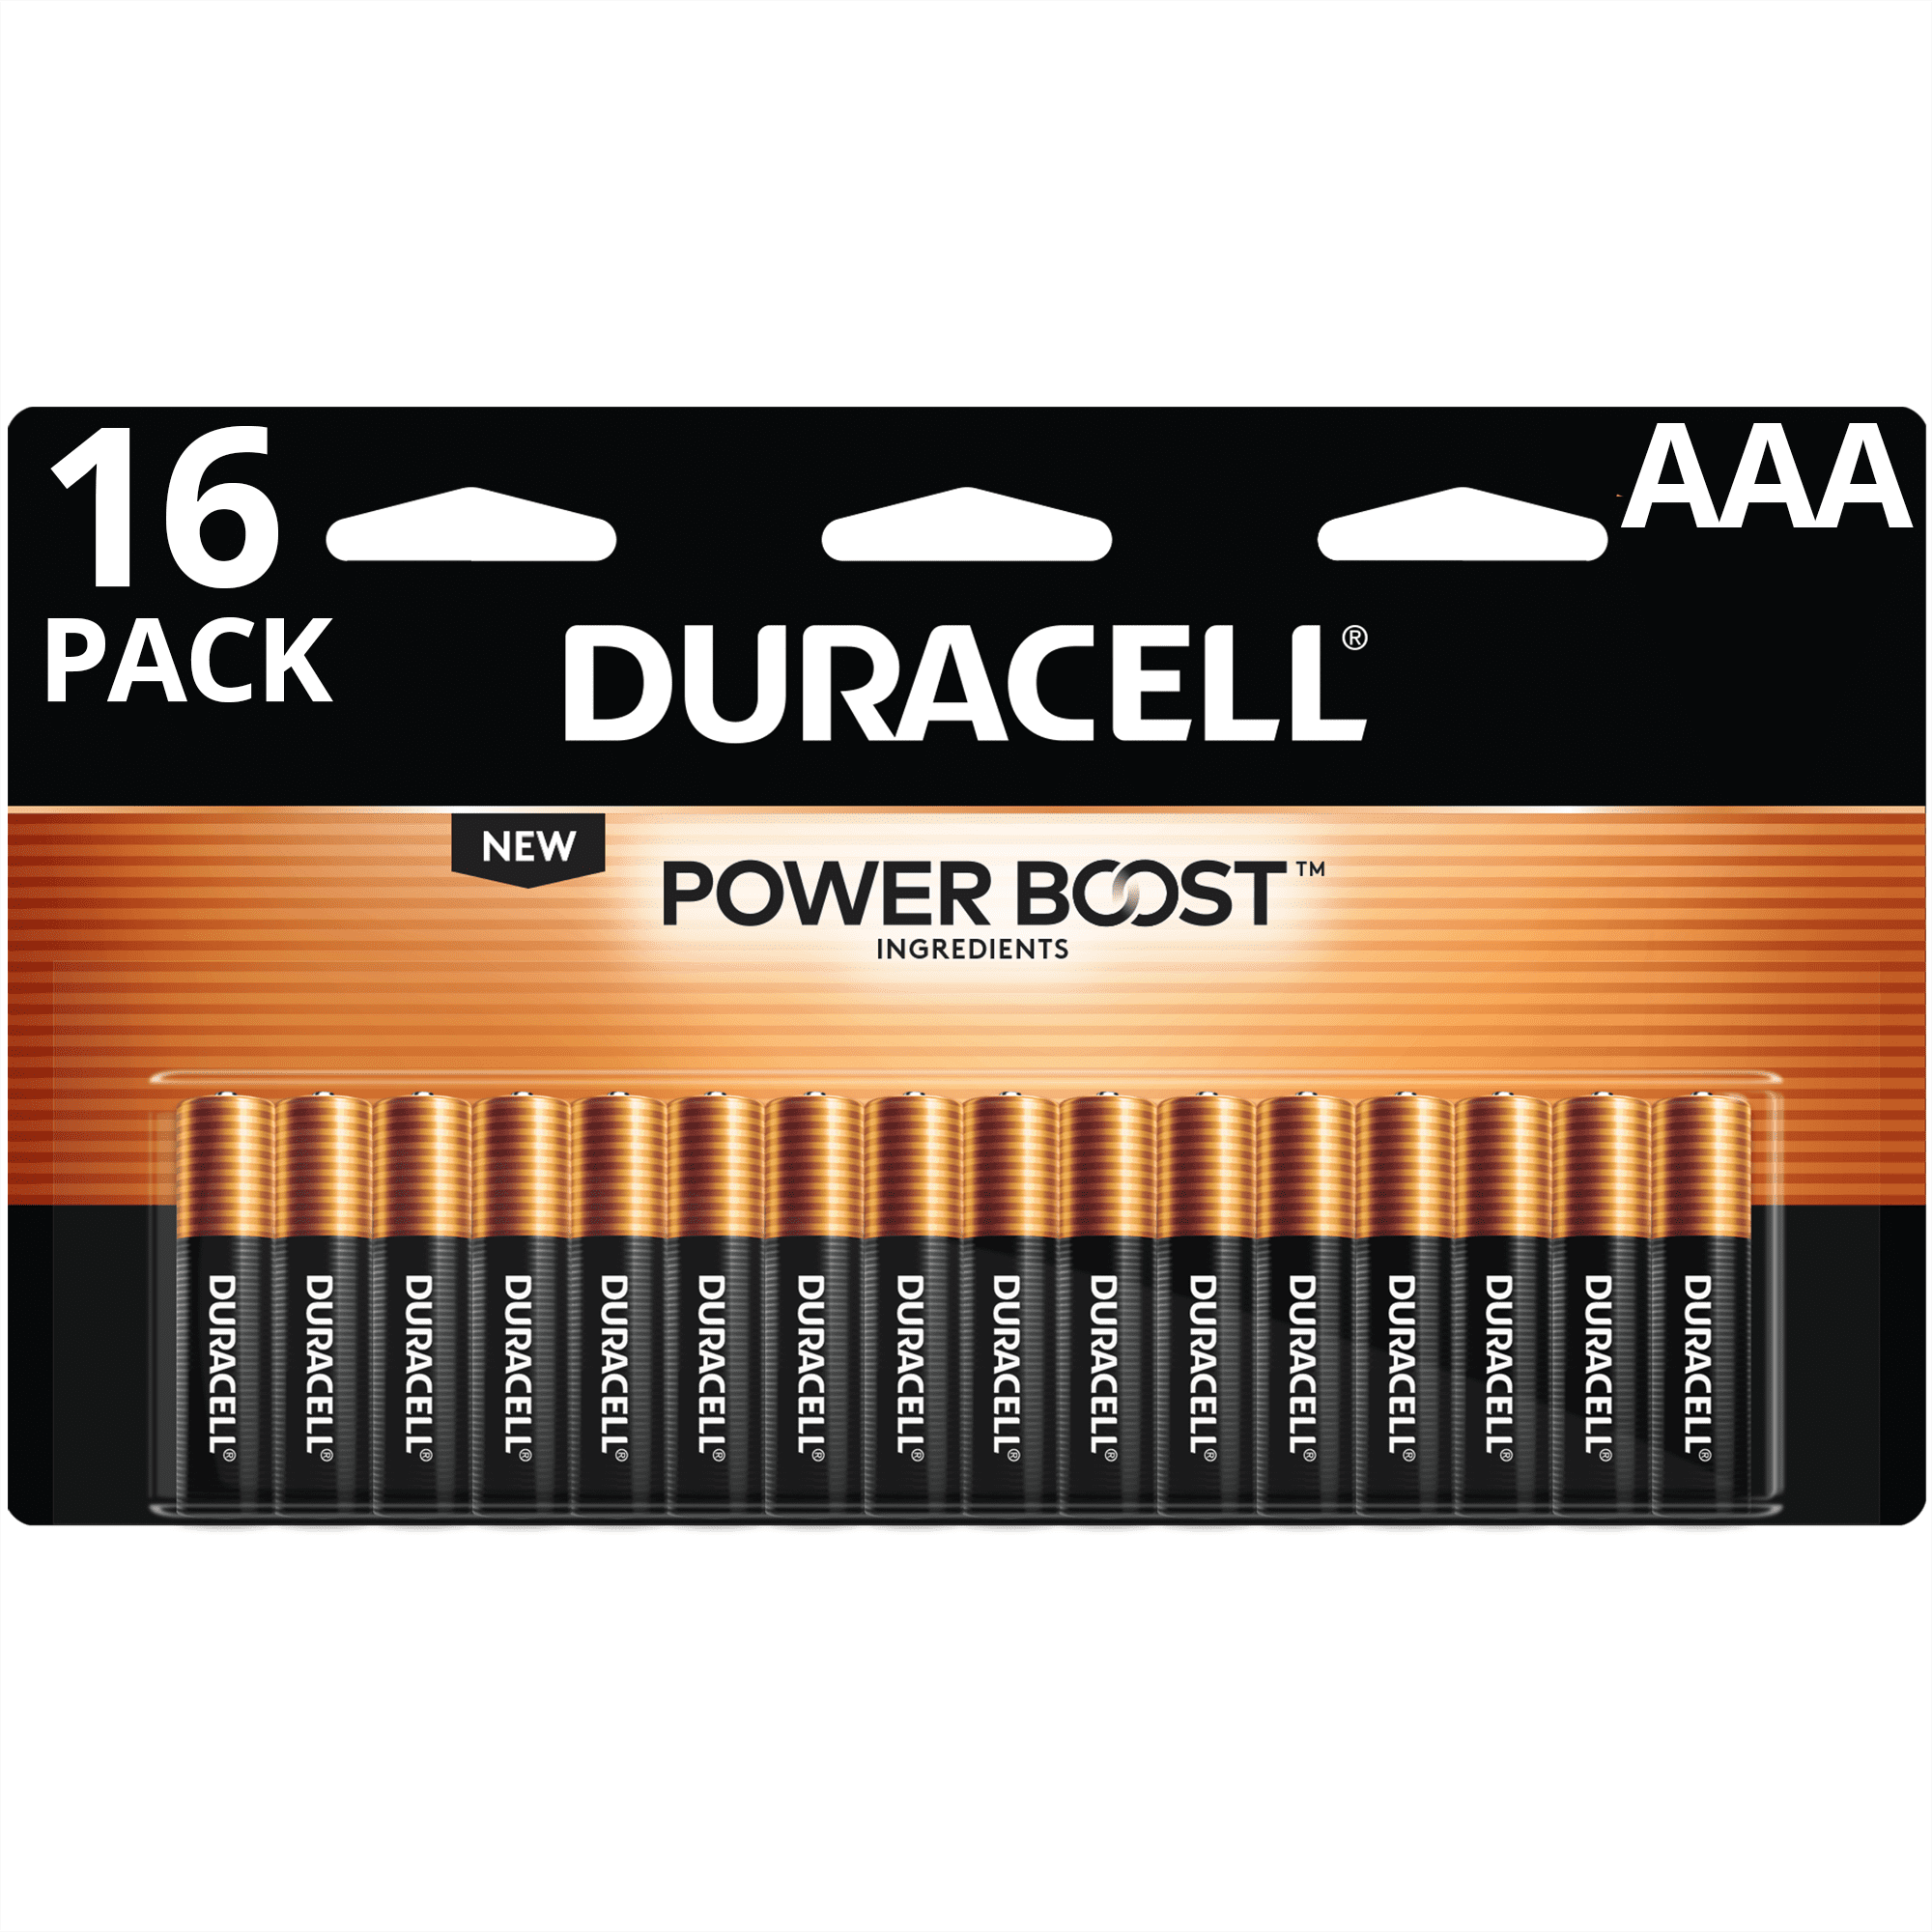 Battery storage container   12 AAA batteries   3 pack 